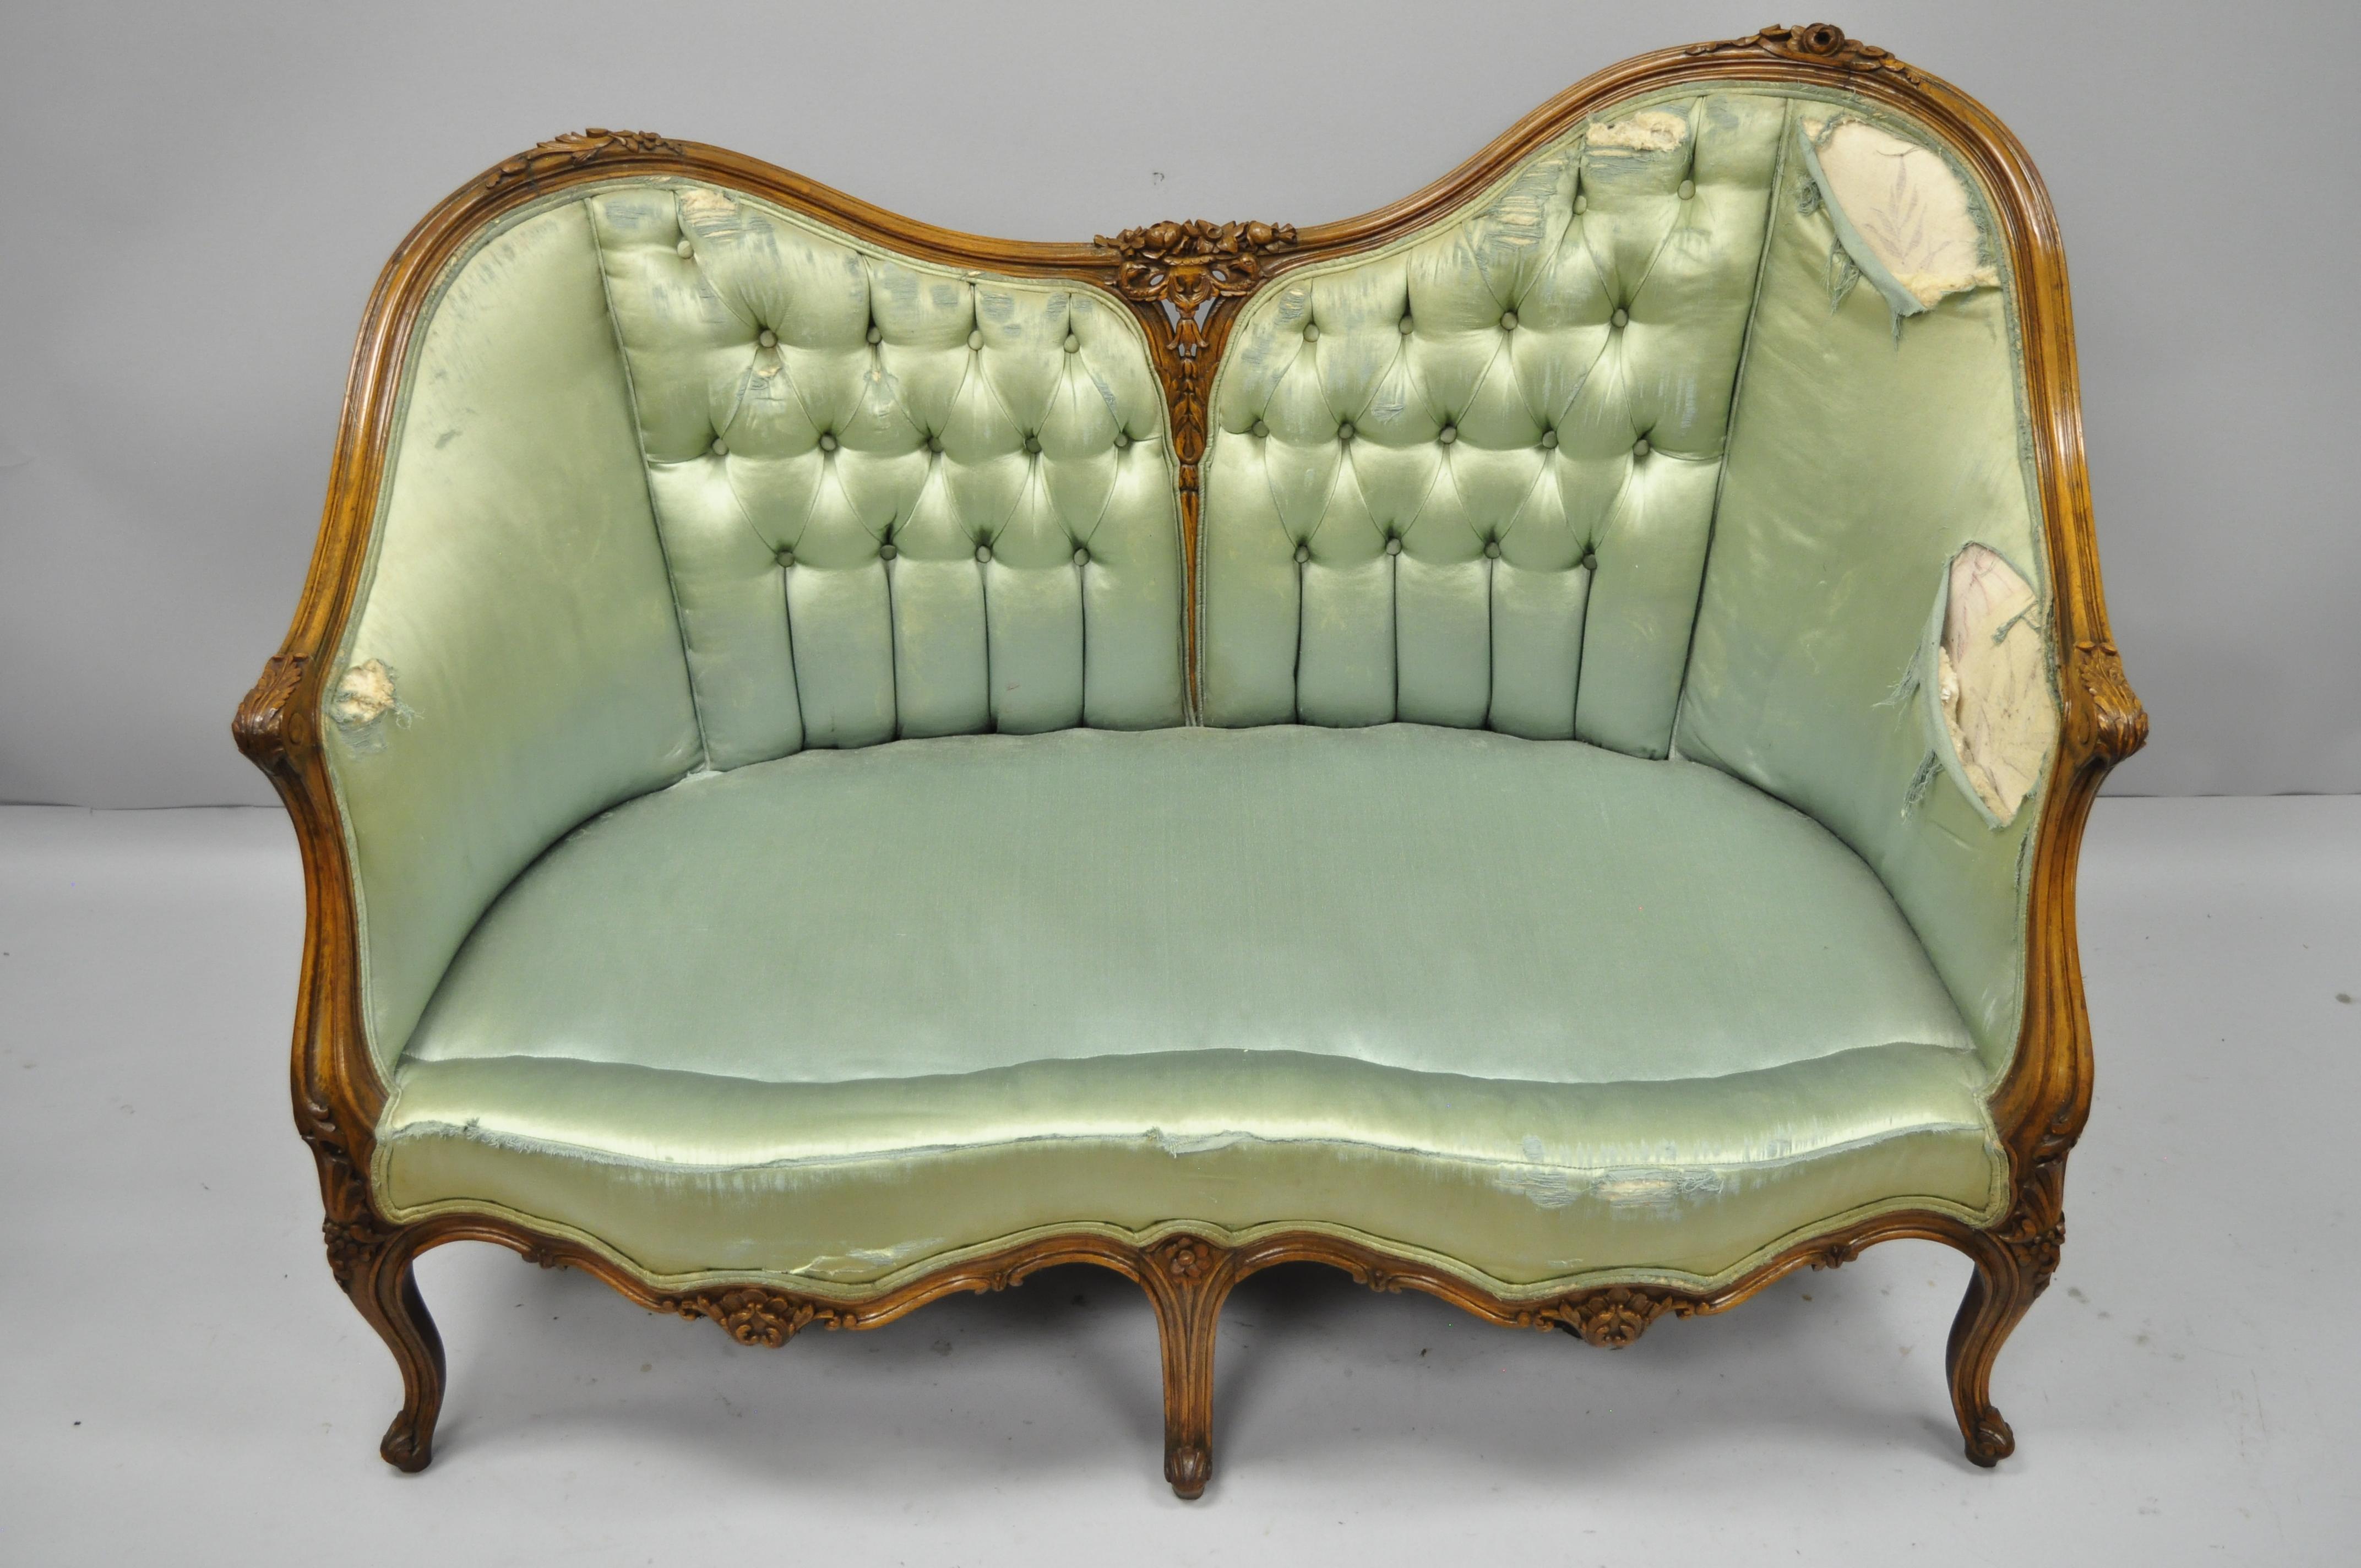 Antique French Louis XV Style carved walnut double hump back settee loveseat. Item features unique double hump back with one end slightly raised, tight solid frame, solid walnut construction, finely carved details, five cabriole legs, and great